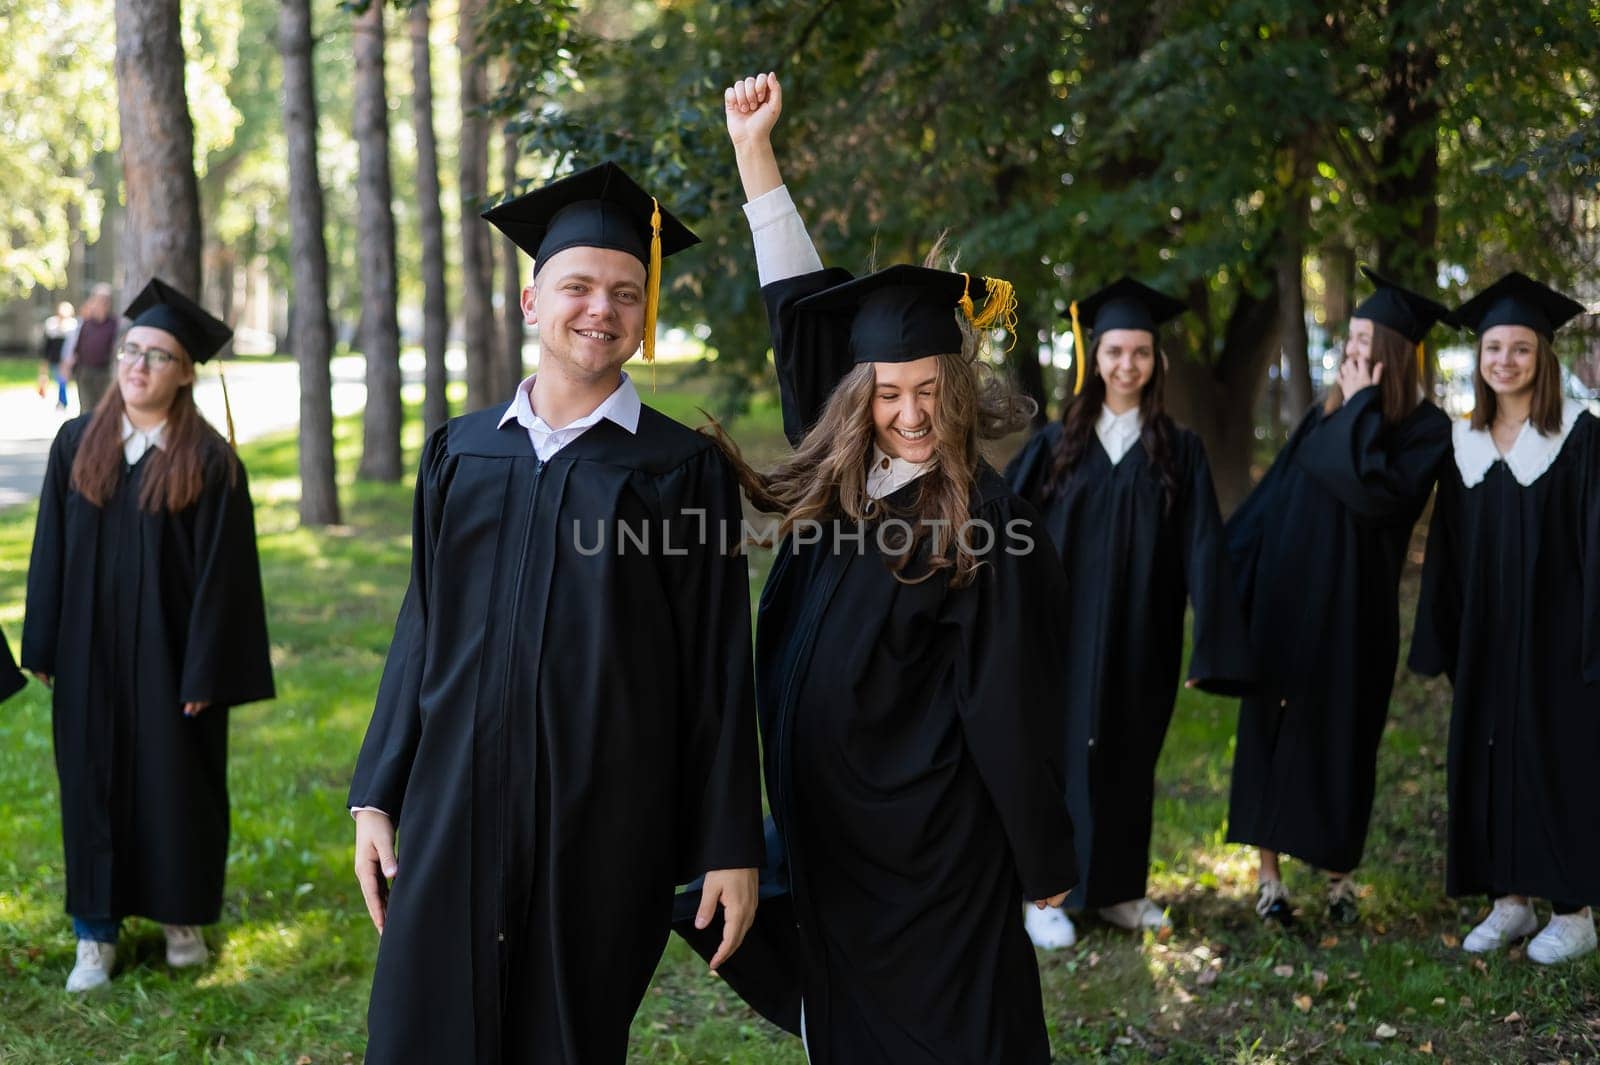 Group of happy young people in graduation gowns outdoors. Students are walking in the park